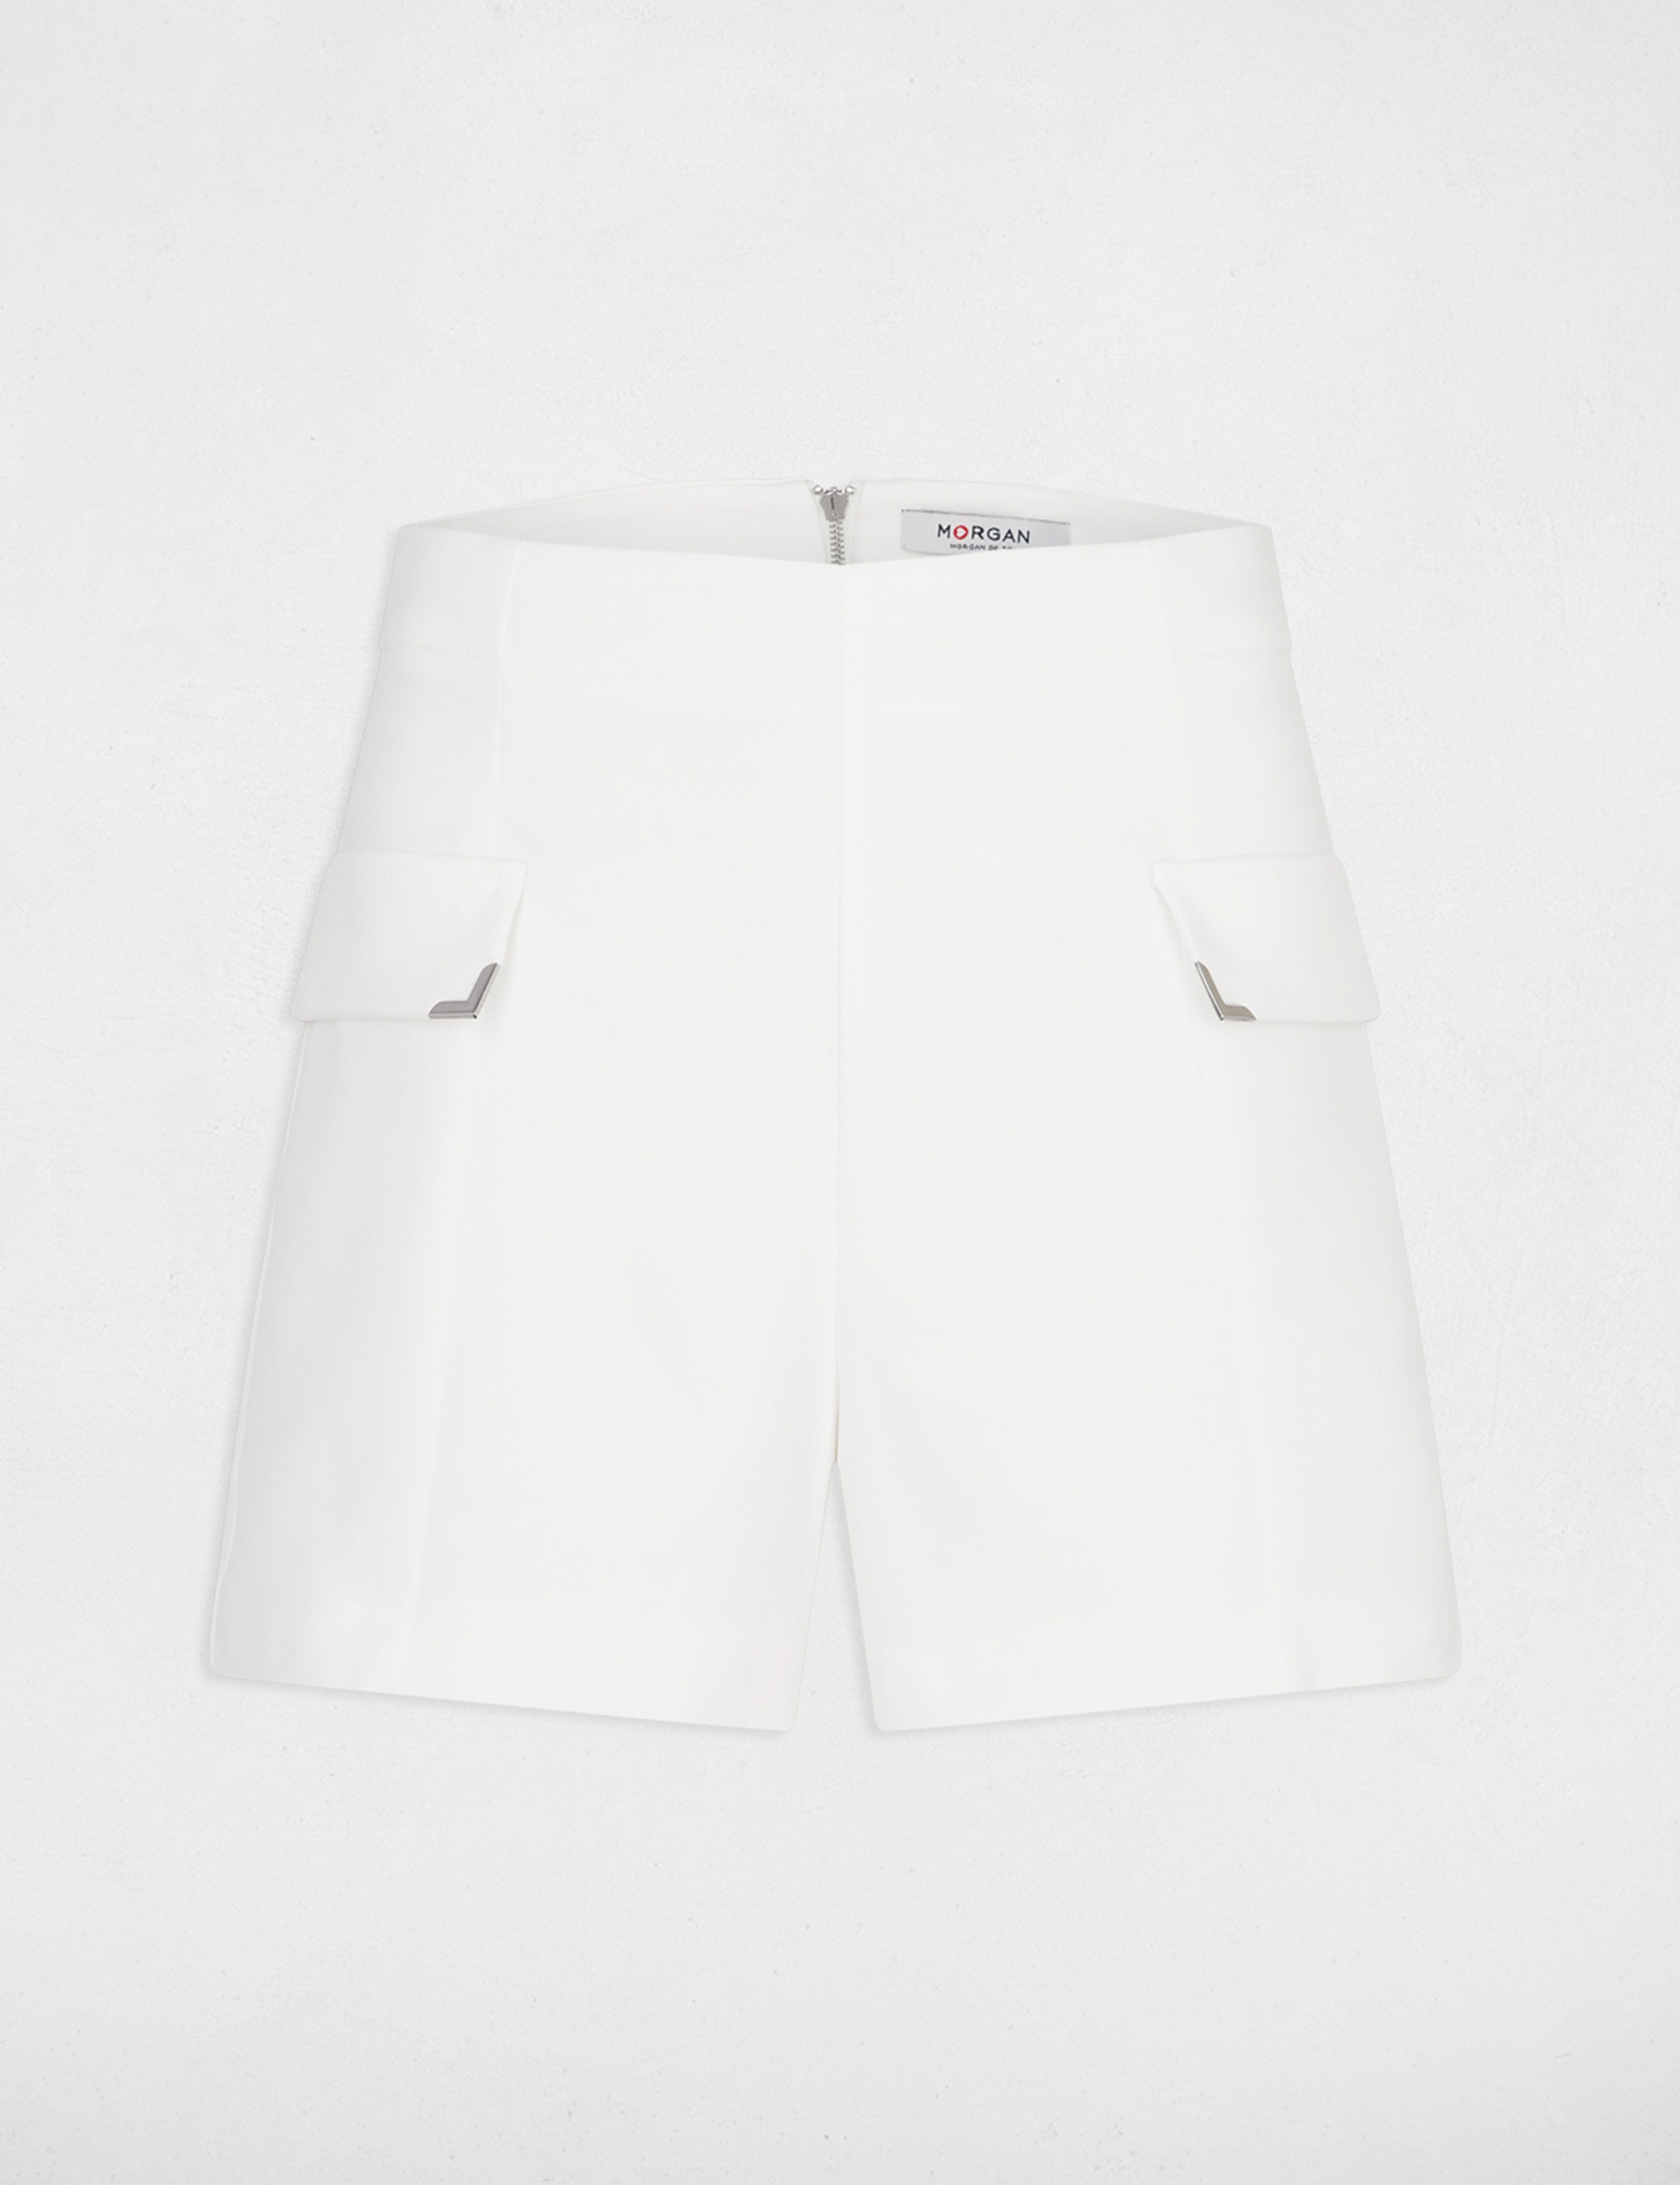 Fitted shorts with flaps ecru ladies'